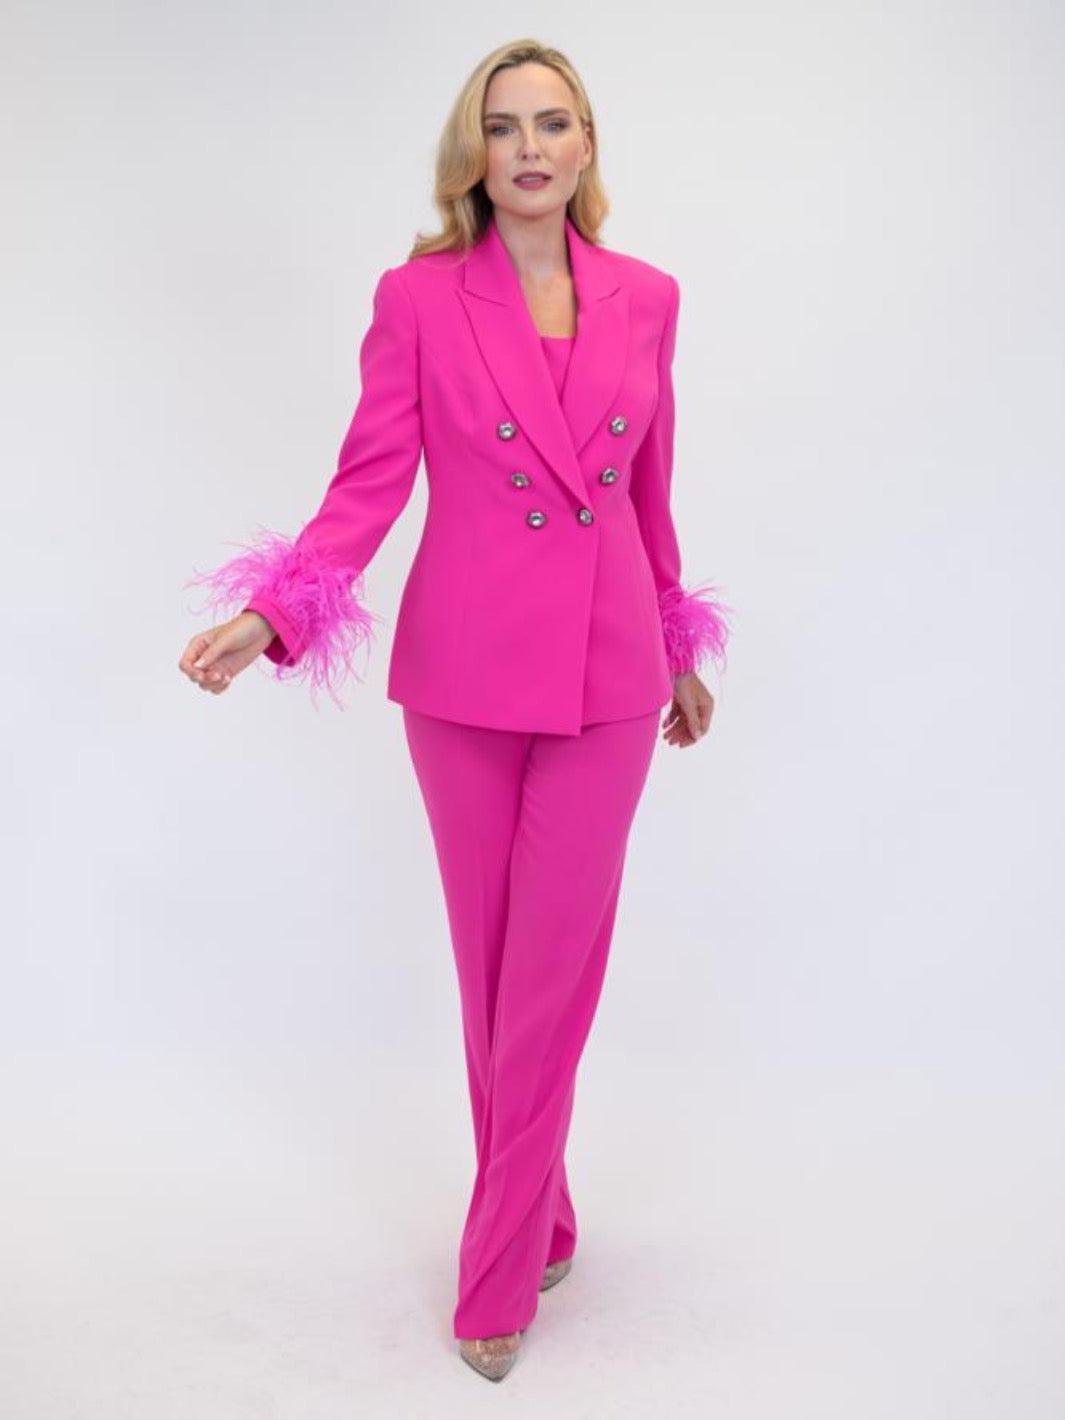 Ophelia Melita Kia Trousers/Jacket/Top in Cerise-Mother of the bride- mother of the groom -Nicola Ross